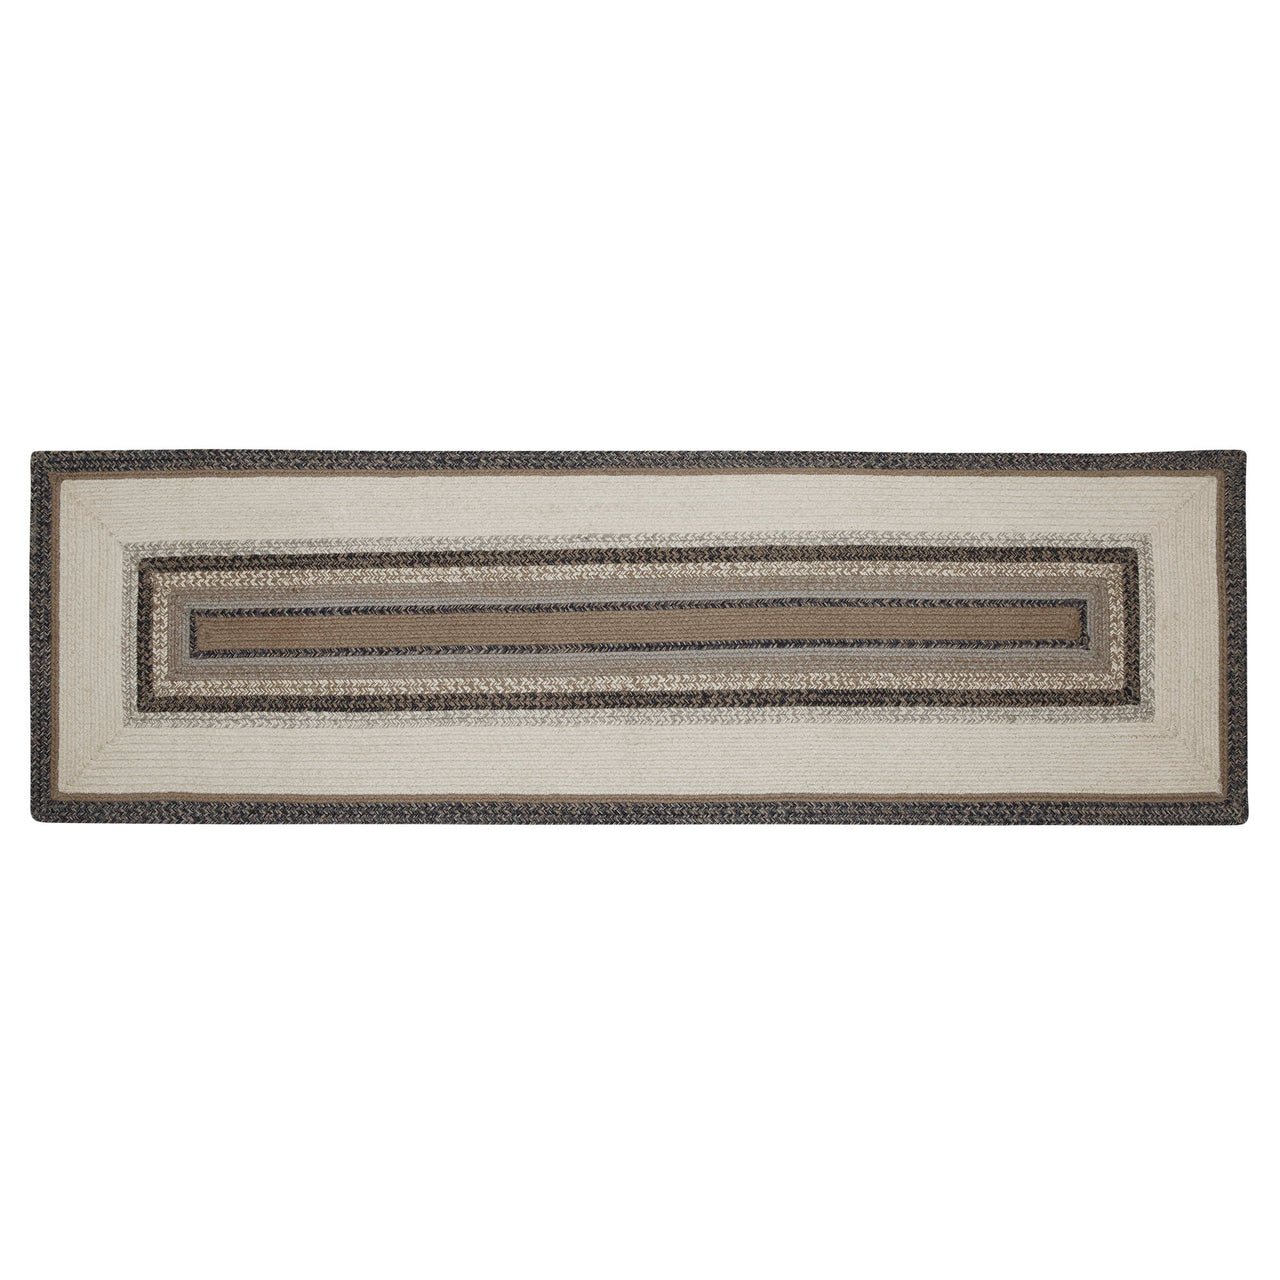 Floral Vine Rect. Jute Braided Runner Rug with Rug Pad 24"x78"(2'x6.5') VHC Brands